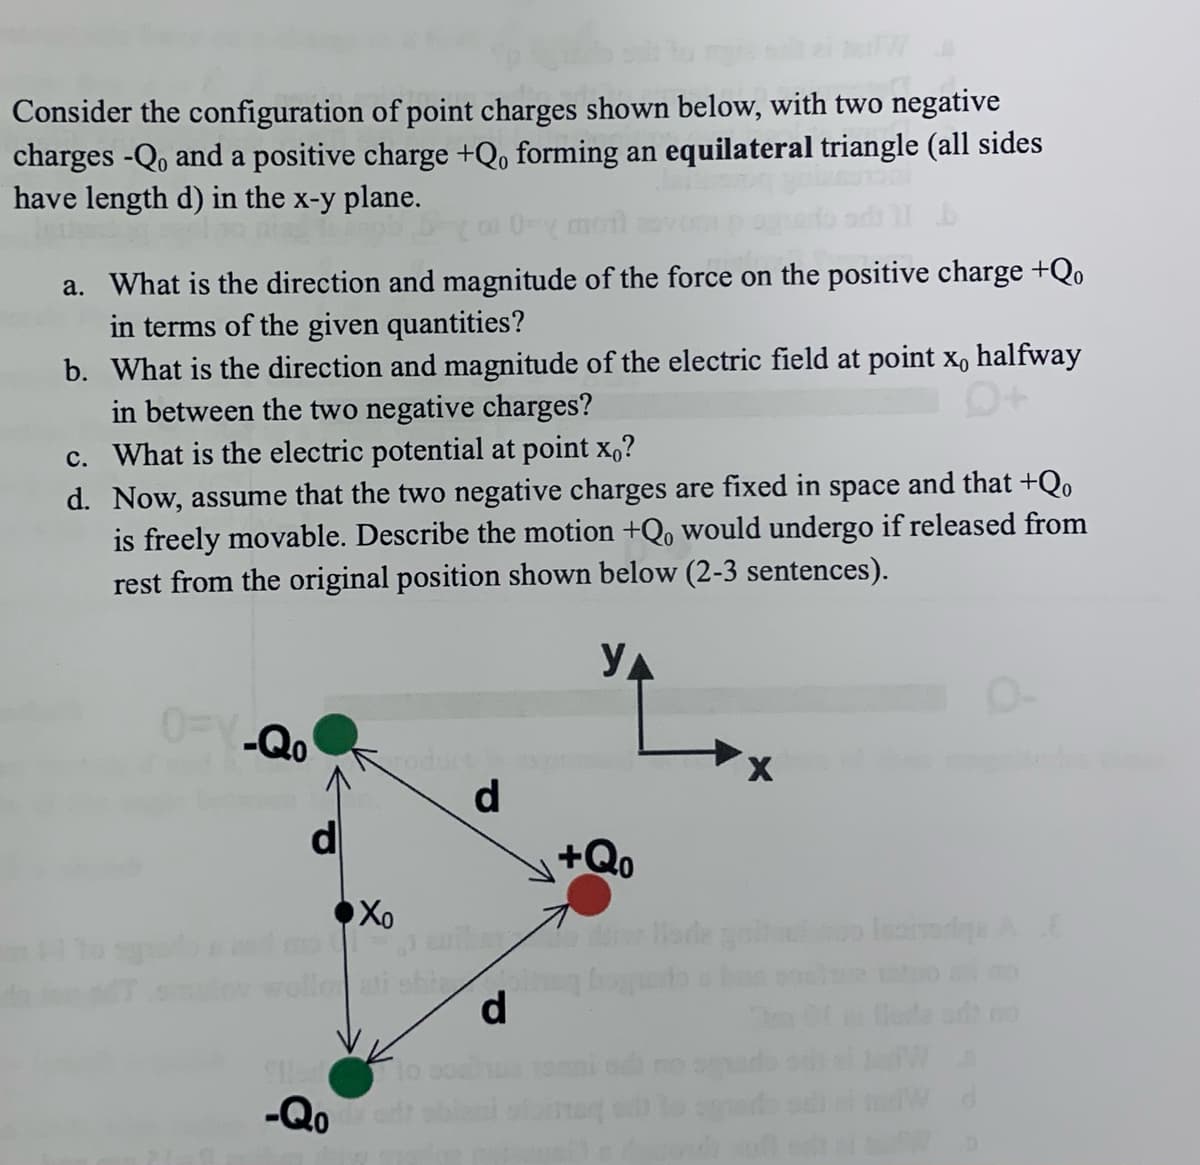 Consider the configuration of point charges shown below, with two negative
charges -Qo and a positive charge +Qo forming an equilateral triangle (all sides
have length d) in the x-y plane.
a. What is the direction and magnitude of the force on the positive charge +Qo
in terms of the given quantities?
b.
What is the direction and magnitude of the electric field at point x, halfway
in between the two negative charges?
c. What is the electric potential at point xo?
d. Now, assume that the two negative charges are fixed in space and that +Qo
is freely movable. Describe the motion +Q, would undergo if released from
rest from the original position shown below (2-3 sentences).
YA
OFV-Qo
Sed
-Qo
roduct
d
Xo
vibay
ati shizo
d
+Qo
iade galtou
Ispodga